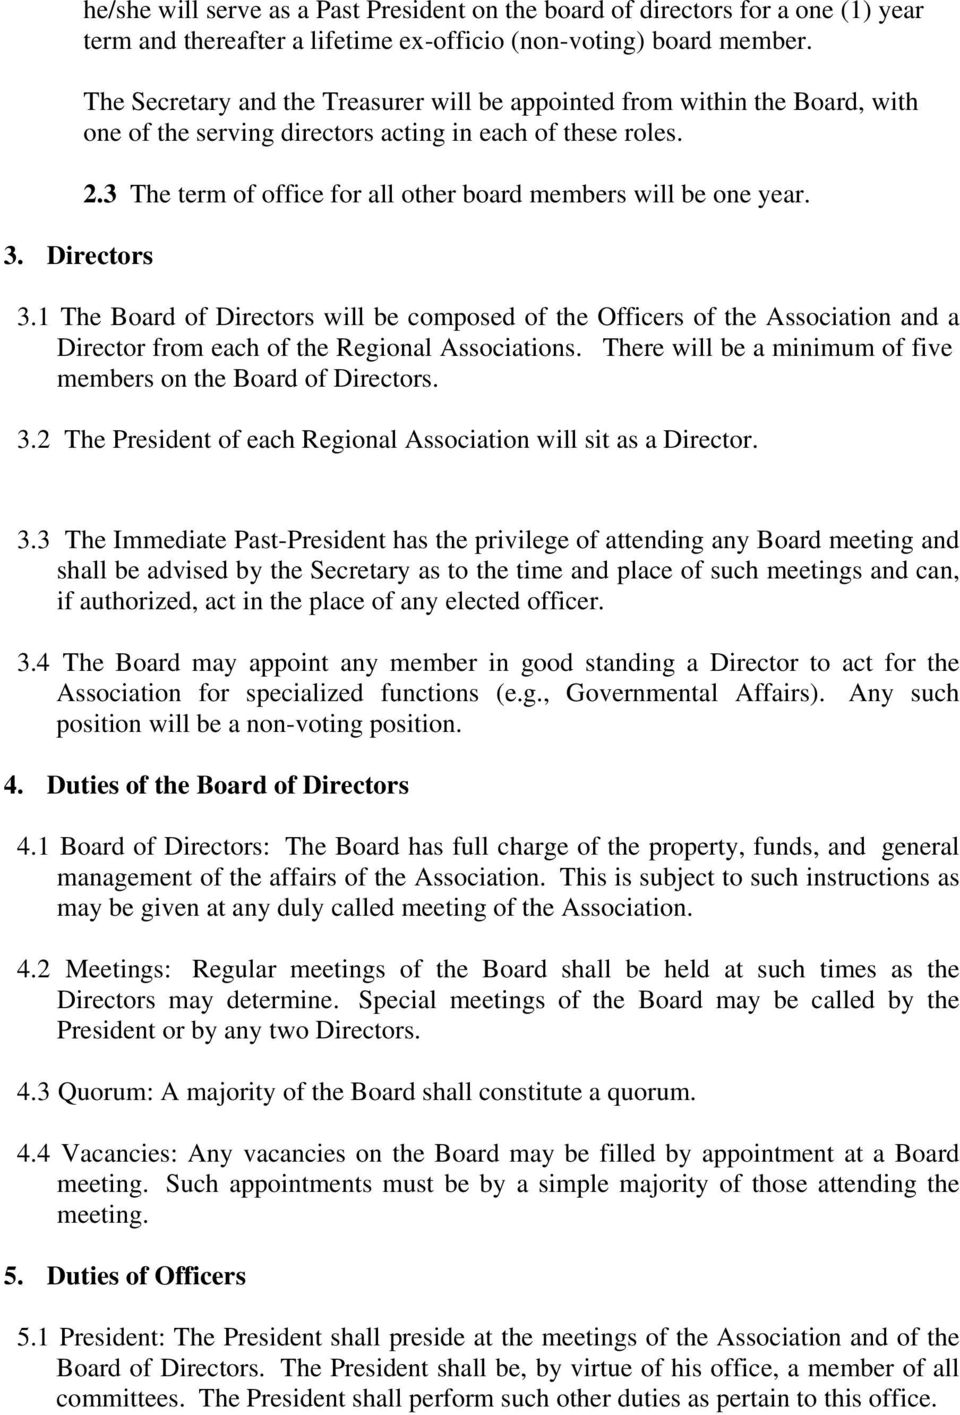 3 The term of office for all other board members will be one year. 3.1 The Board of Directors will be composed of the Officers of the Association and a Director from each of the Regional Associations.